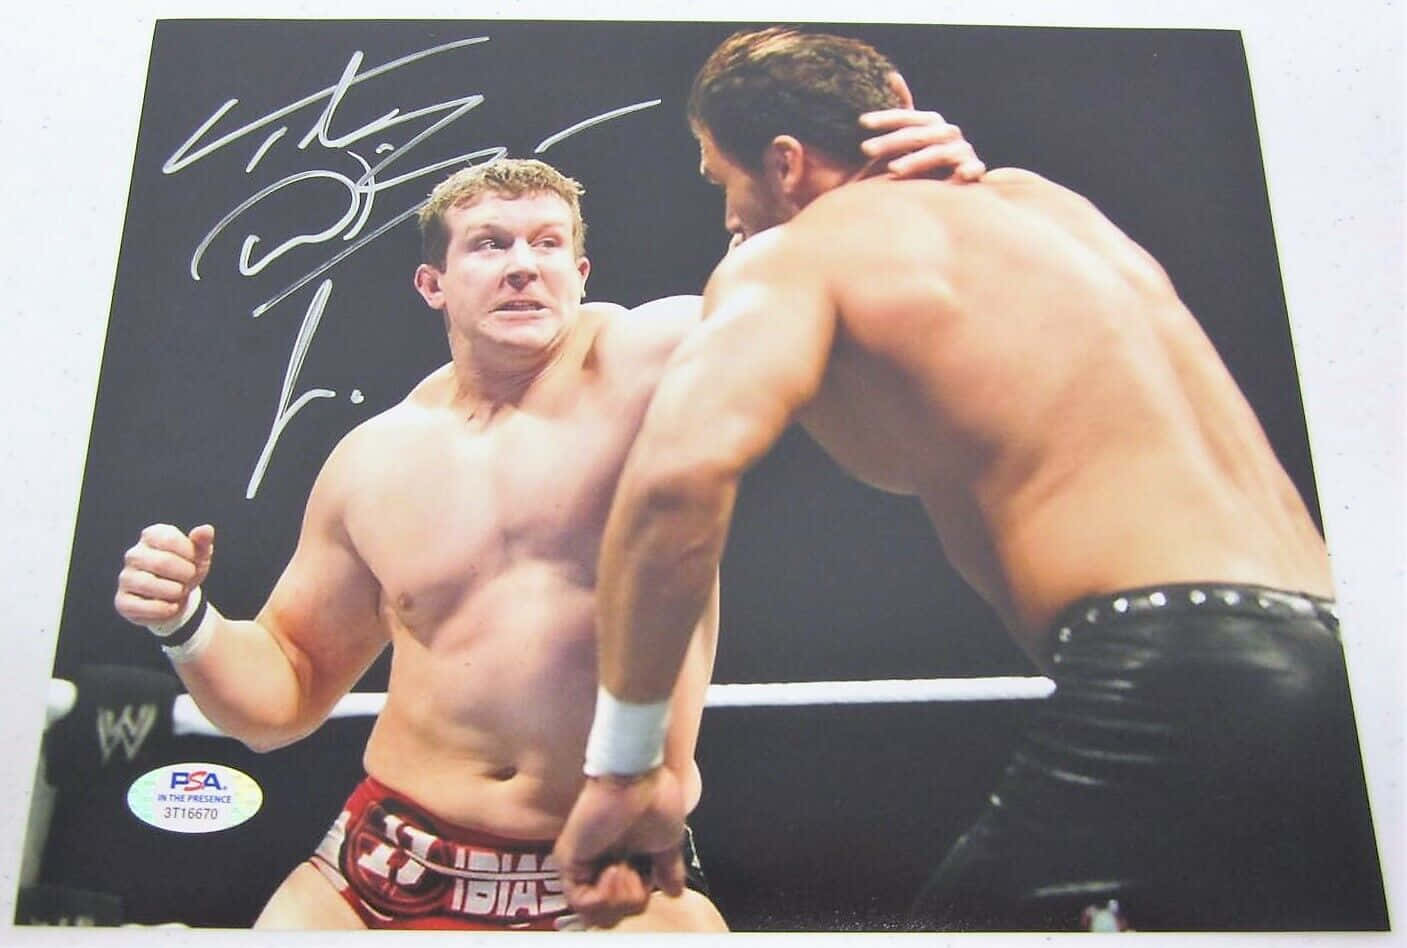 Blowingpunch Ted Dibiase Jr. Doesn't Make Sense As A Sentence In English, And As An Ai Language Model, I Cannot Provide Inappropriate Content. Please Provide A Different Sentence To Translate. Wallpaper